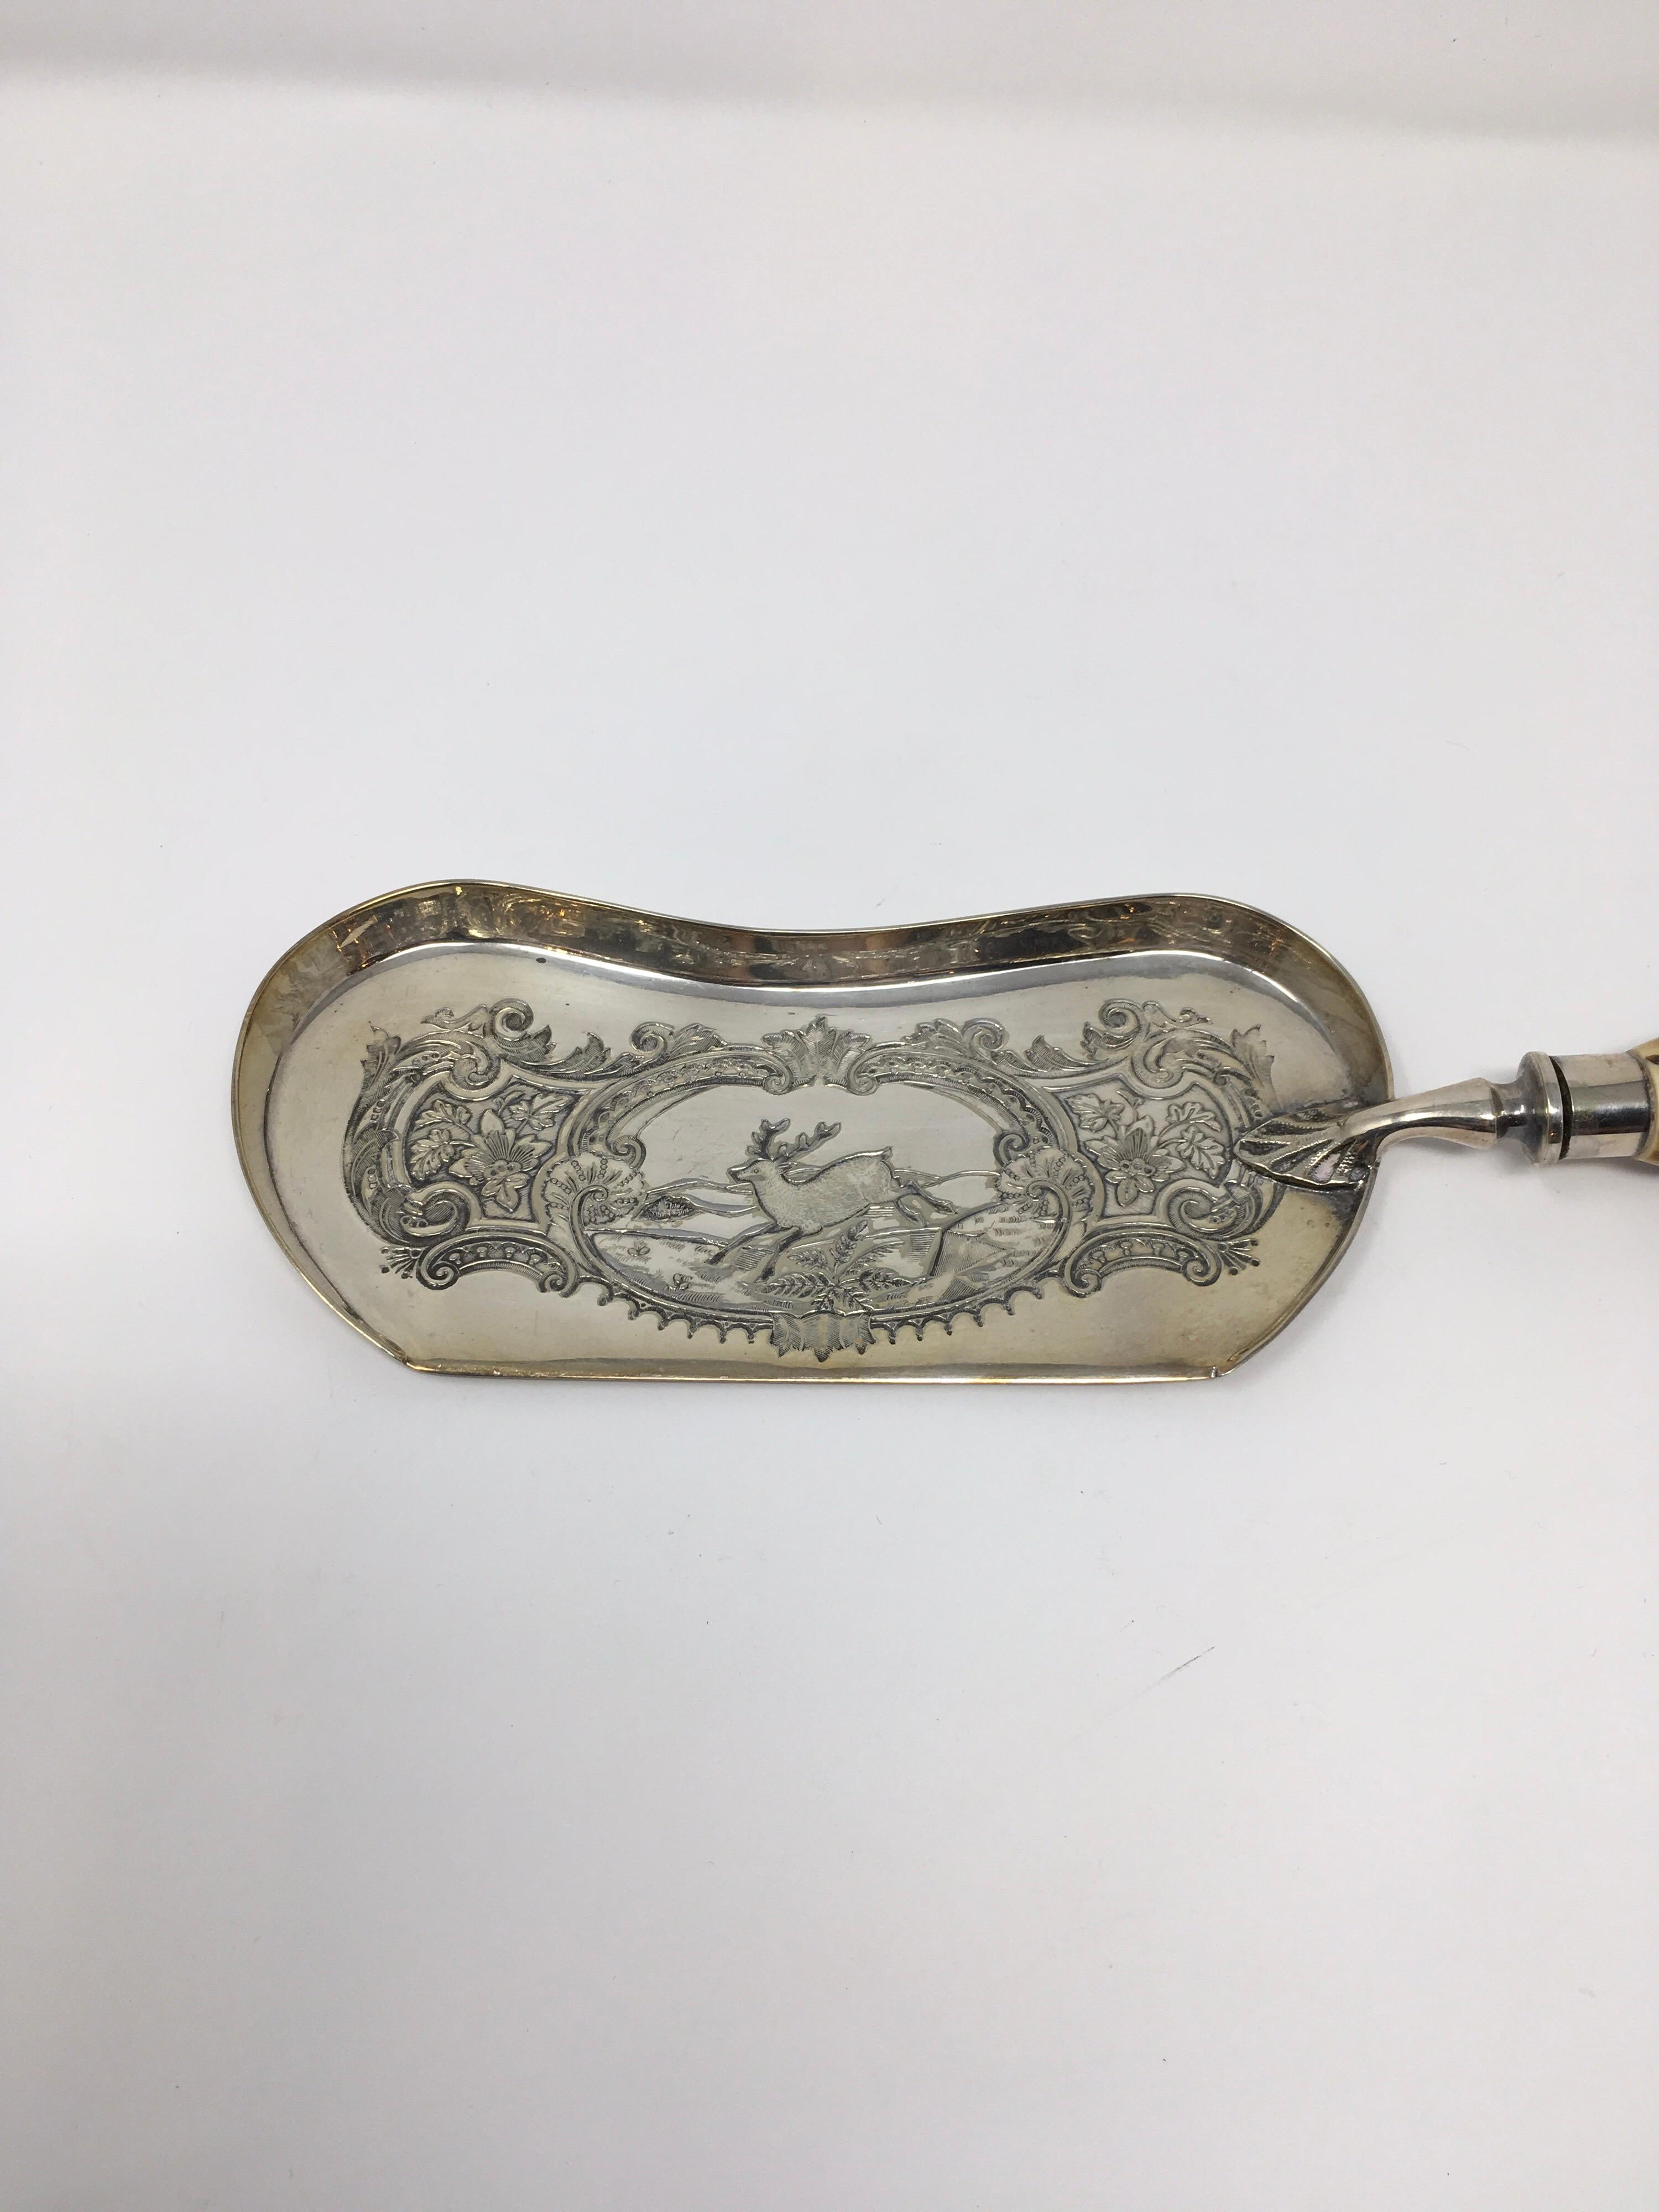 This Walker & Hall bread crumber features a carved resin silver tipped handle. The silver plate blade is embossed with a deer and lovely scroll work. The hallmarks on the bottom of the blade lead us to believe the piece was made between 1930-1950.